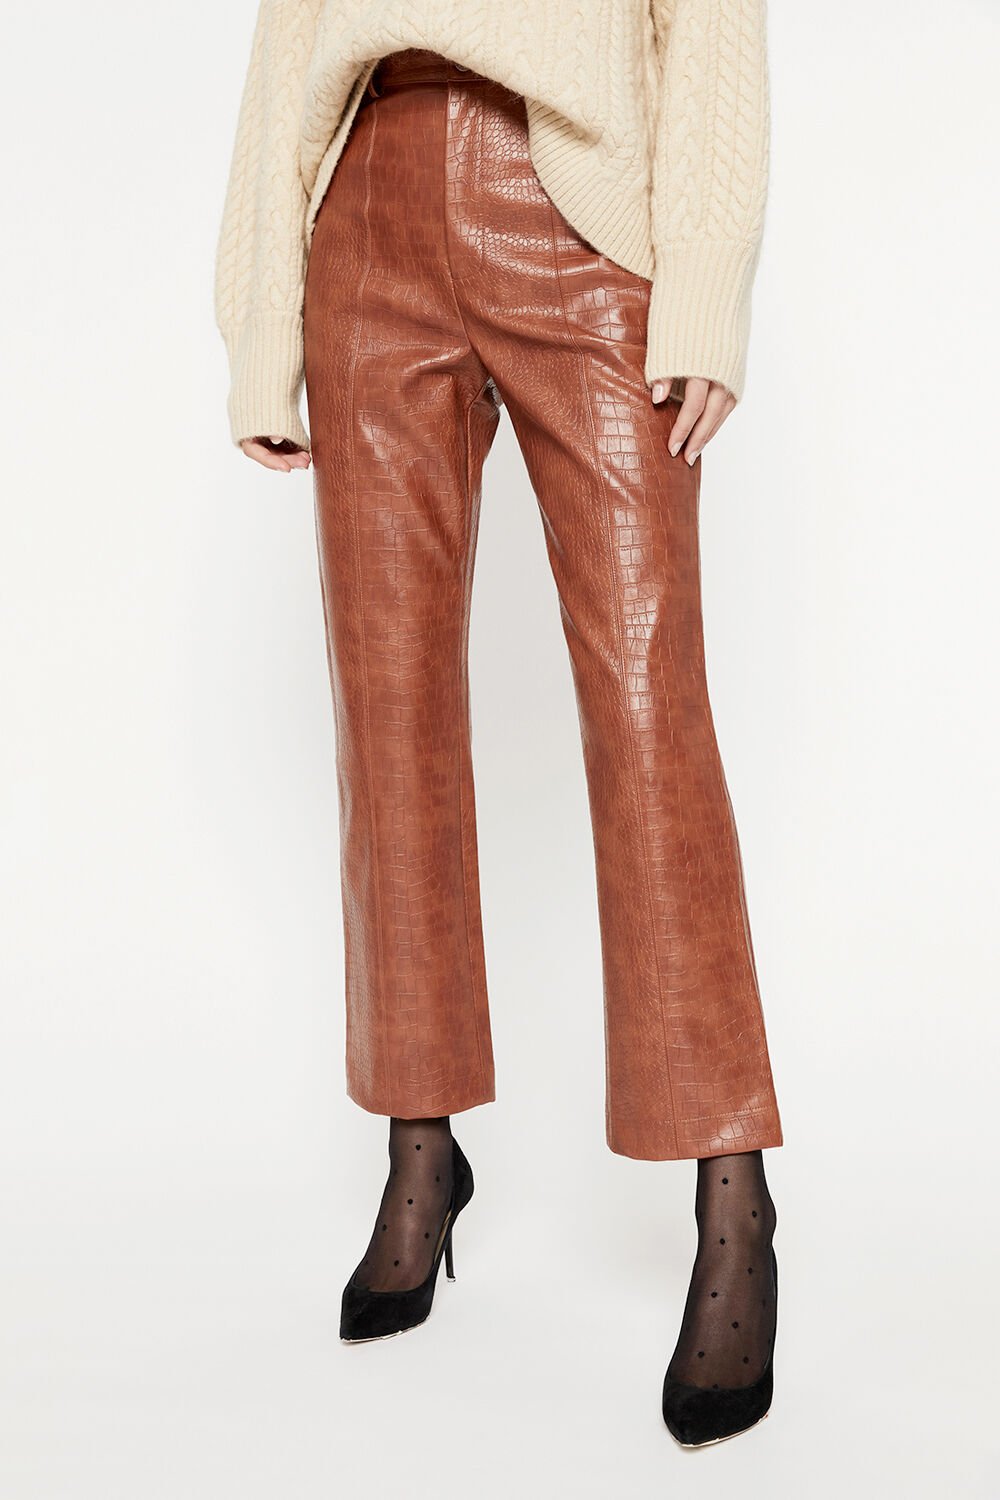 CROC VEGAN LEATHER PANT in colour TOBACCO BROWN